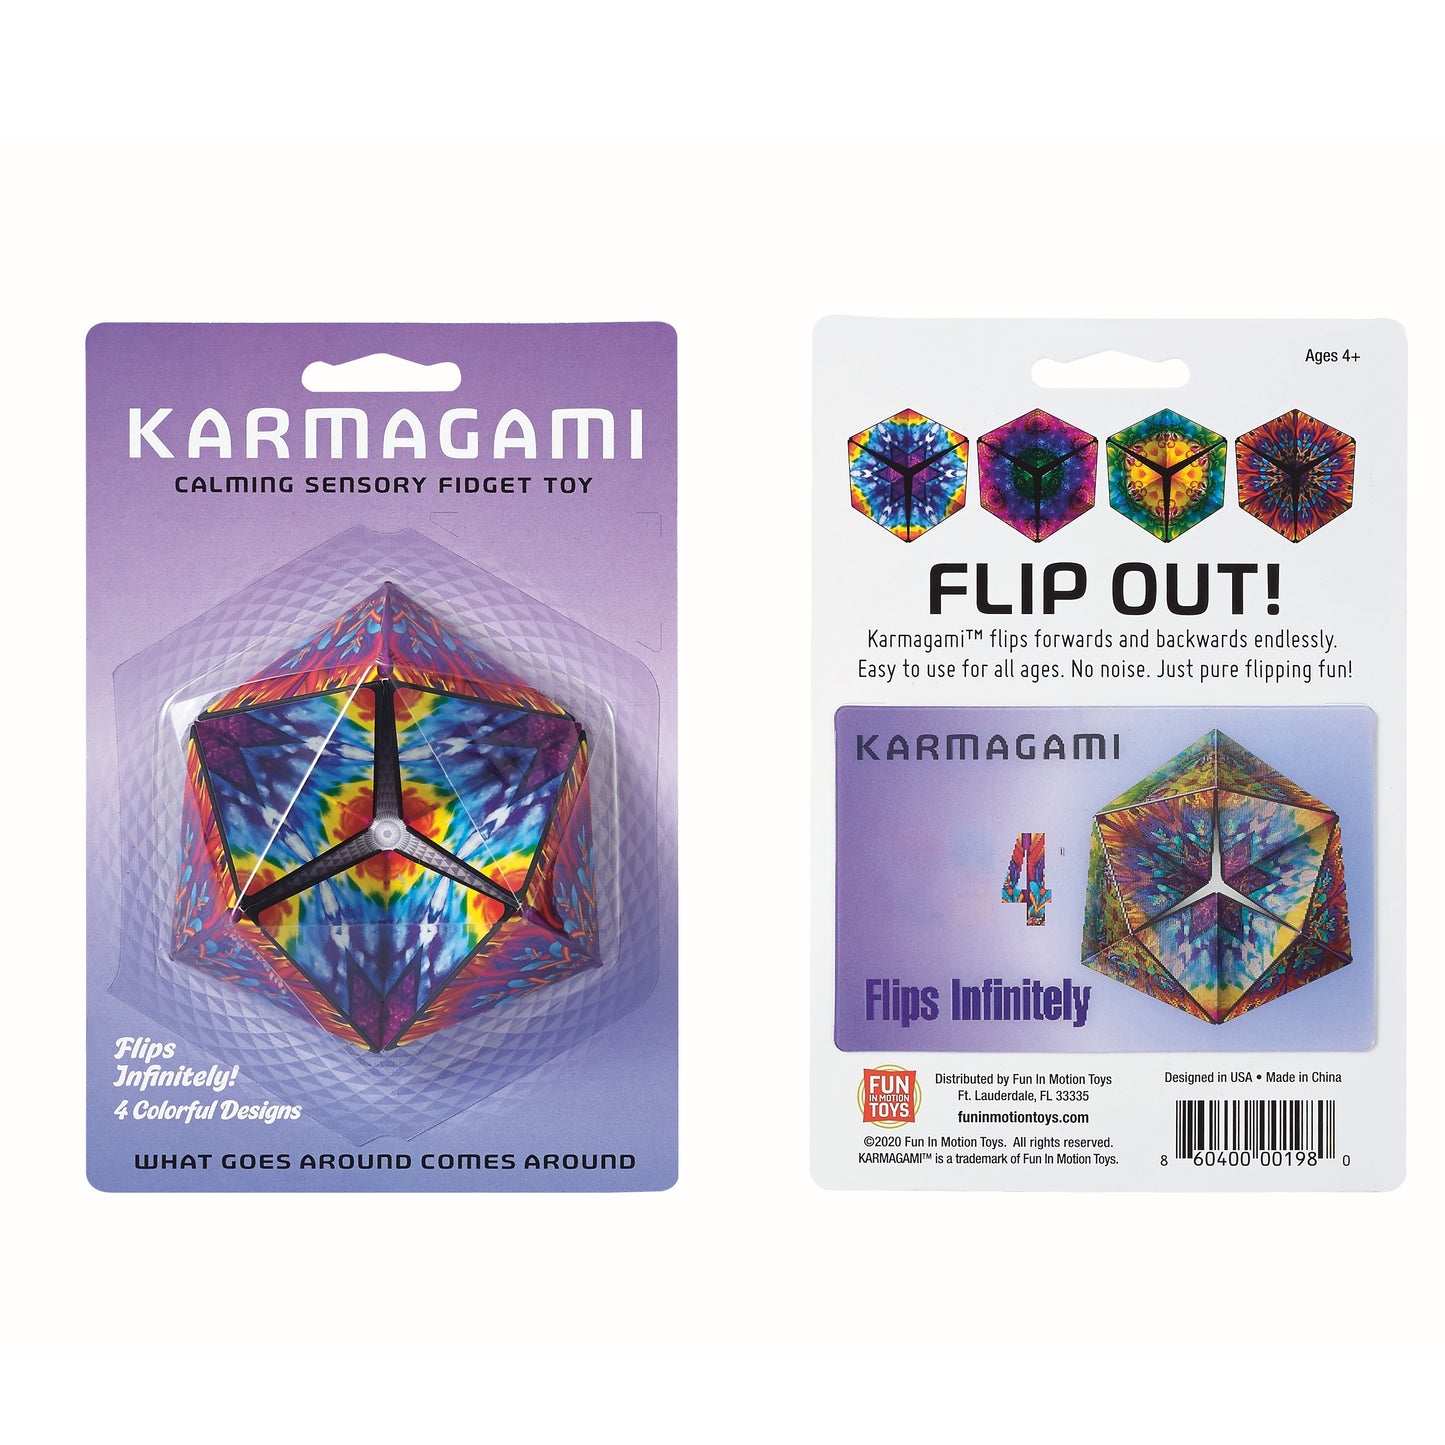 Karmagami fidget toy in packet